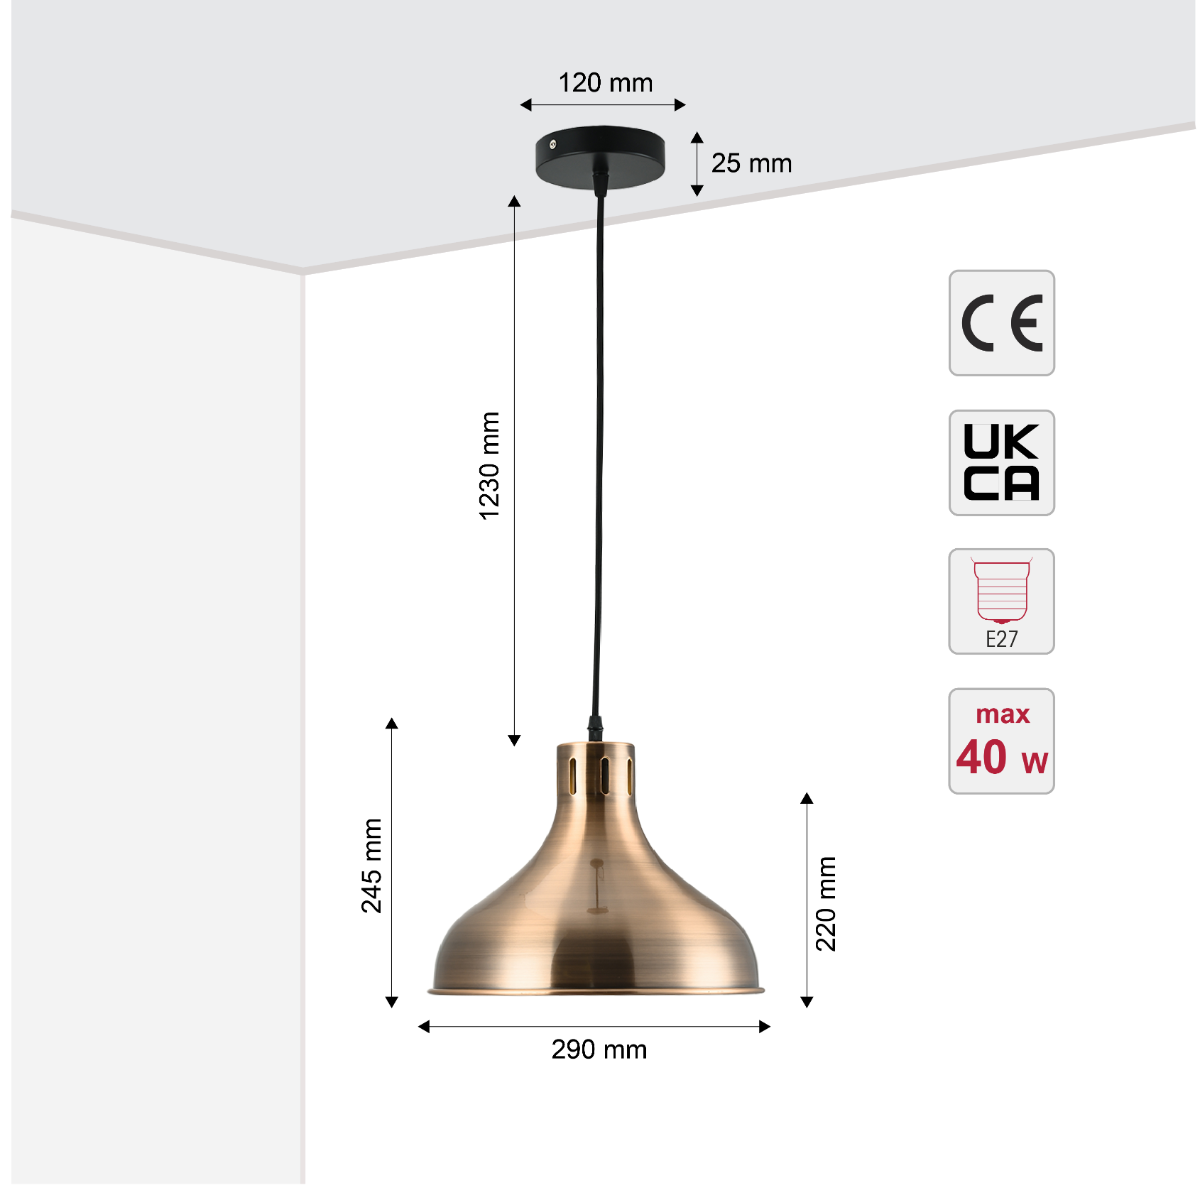 Size and certifications of Artisan Onion Dome Pendant Light 150-18436